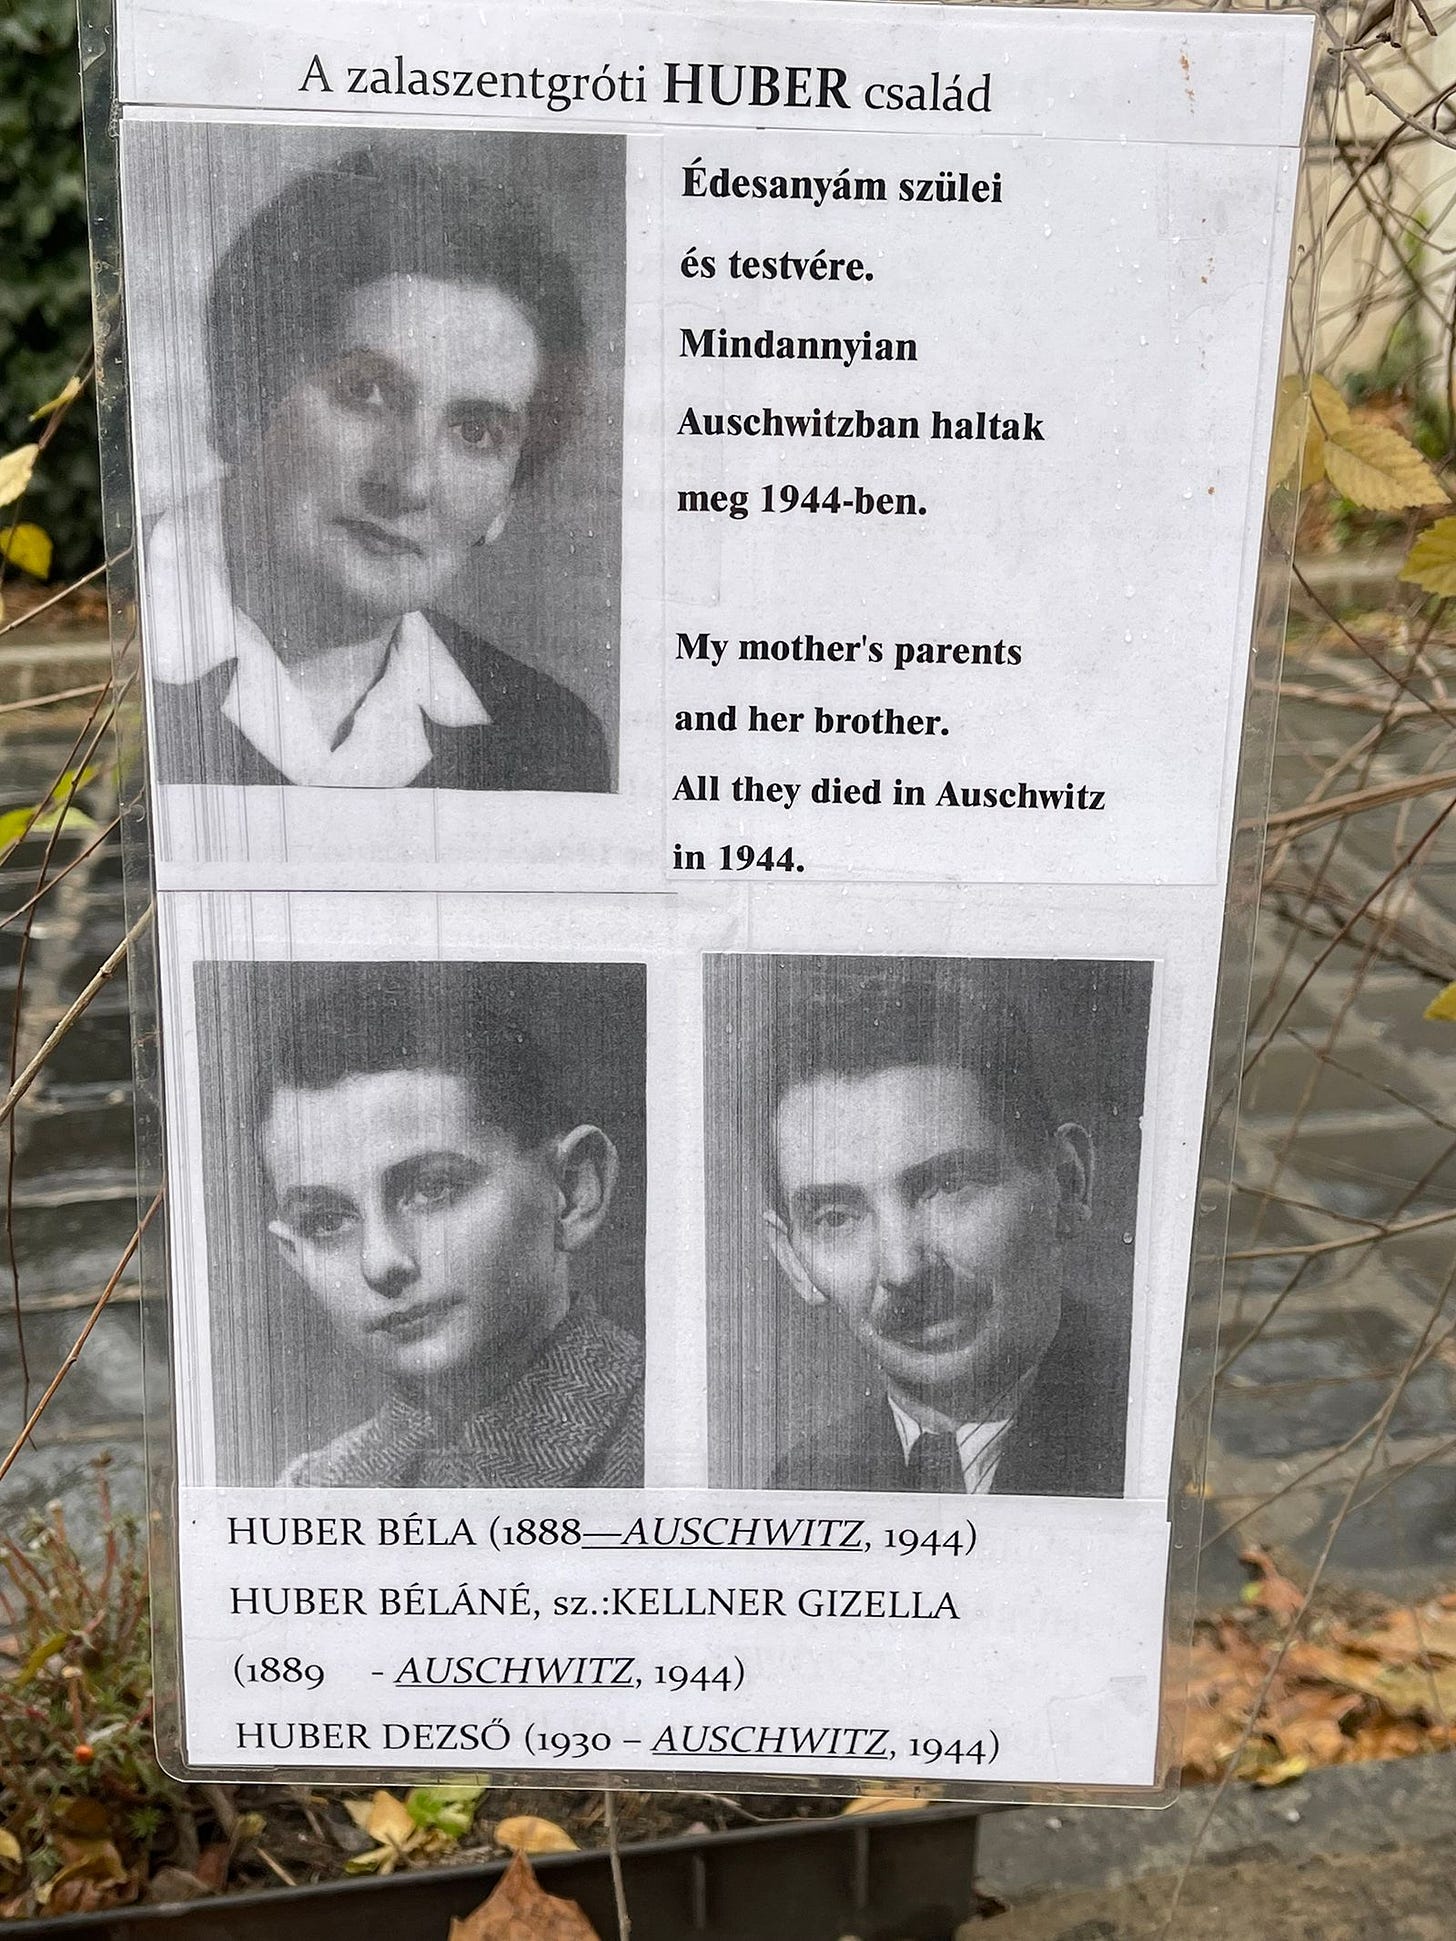 Leaflets left at the memorial to commemorate the 70th anniversary of the deportation of Hungary's Jews. Budapest, Freedom Square. (Photo by Vivian Bercovici)